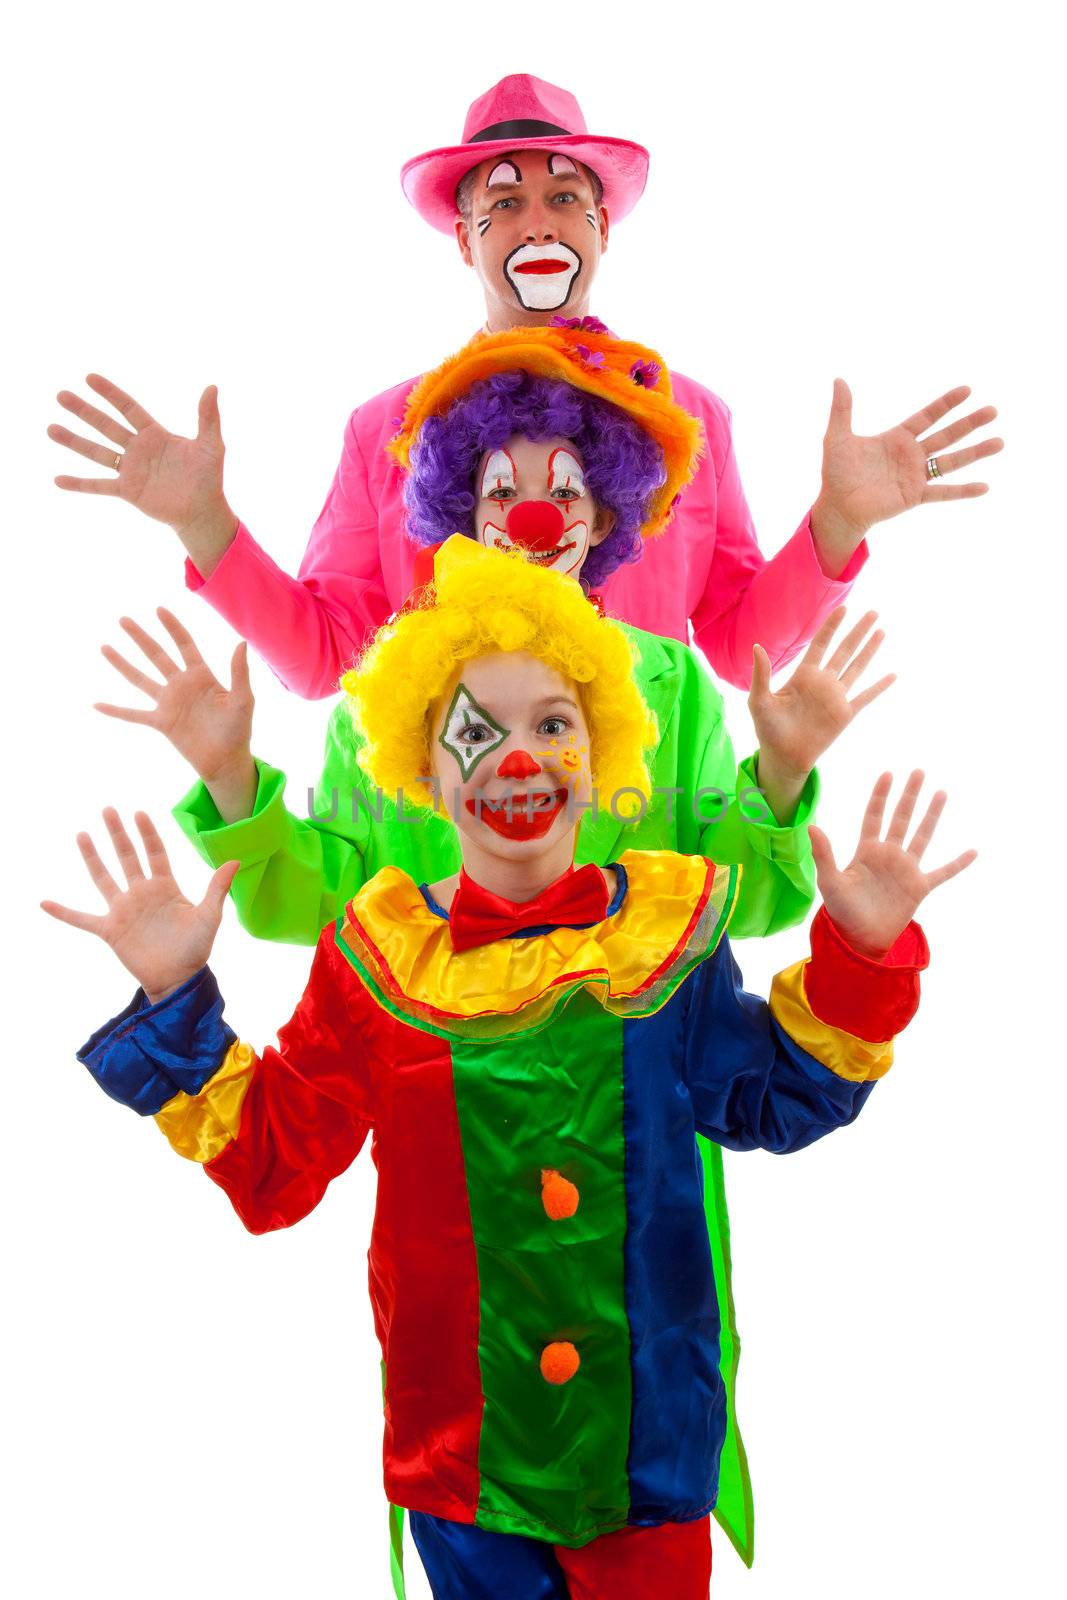 Three people dressed up as colorful funny clown by sannie32